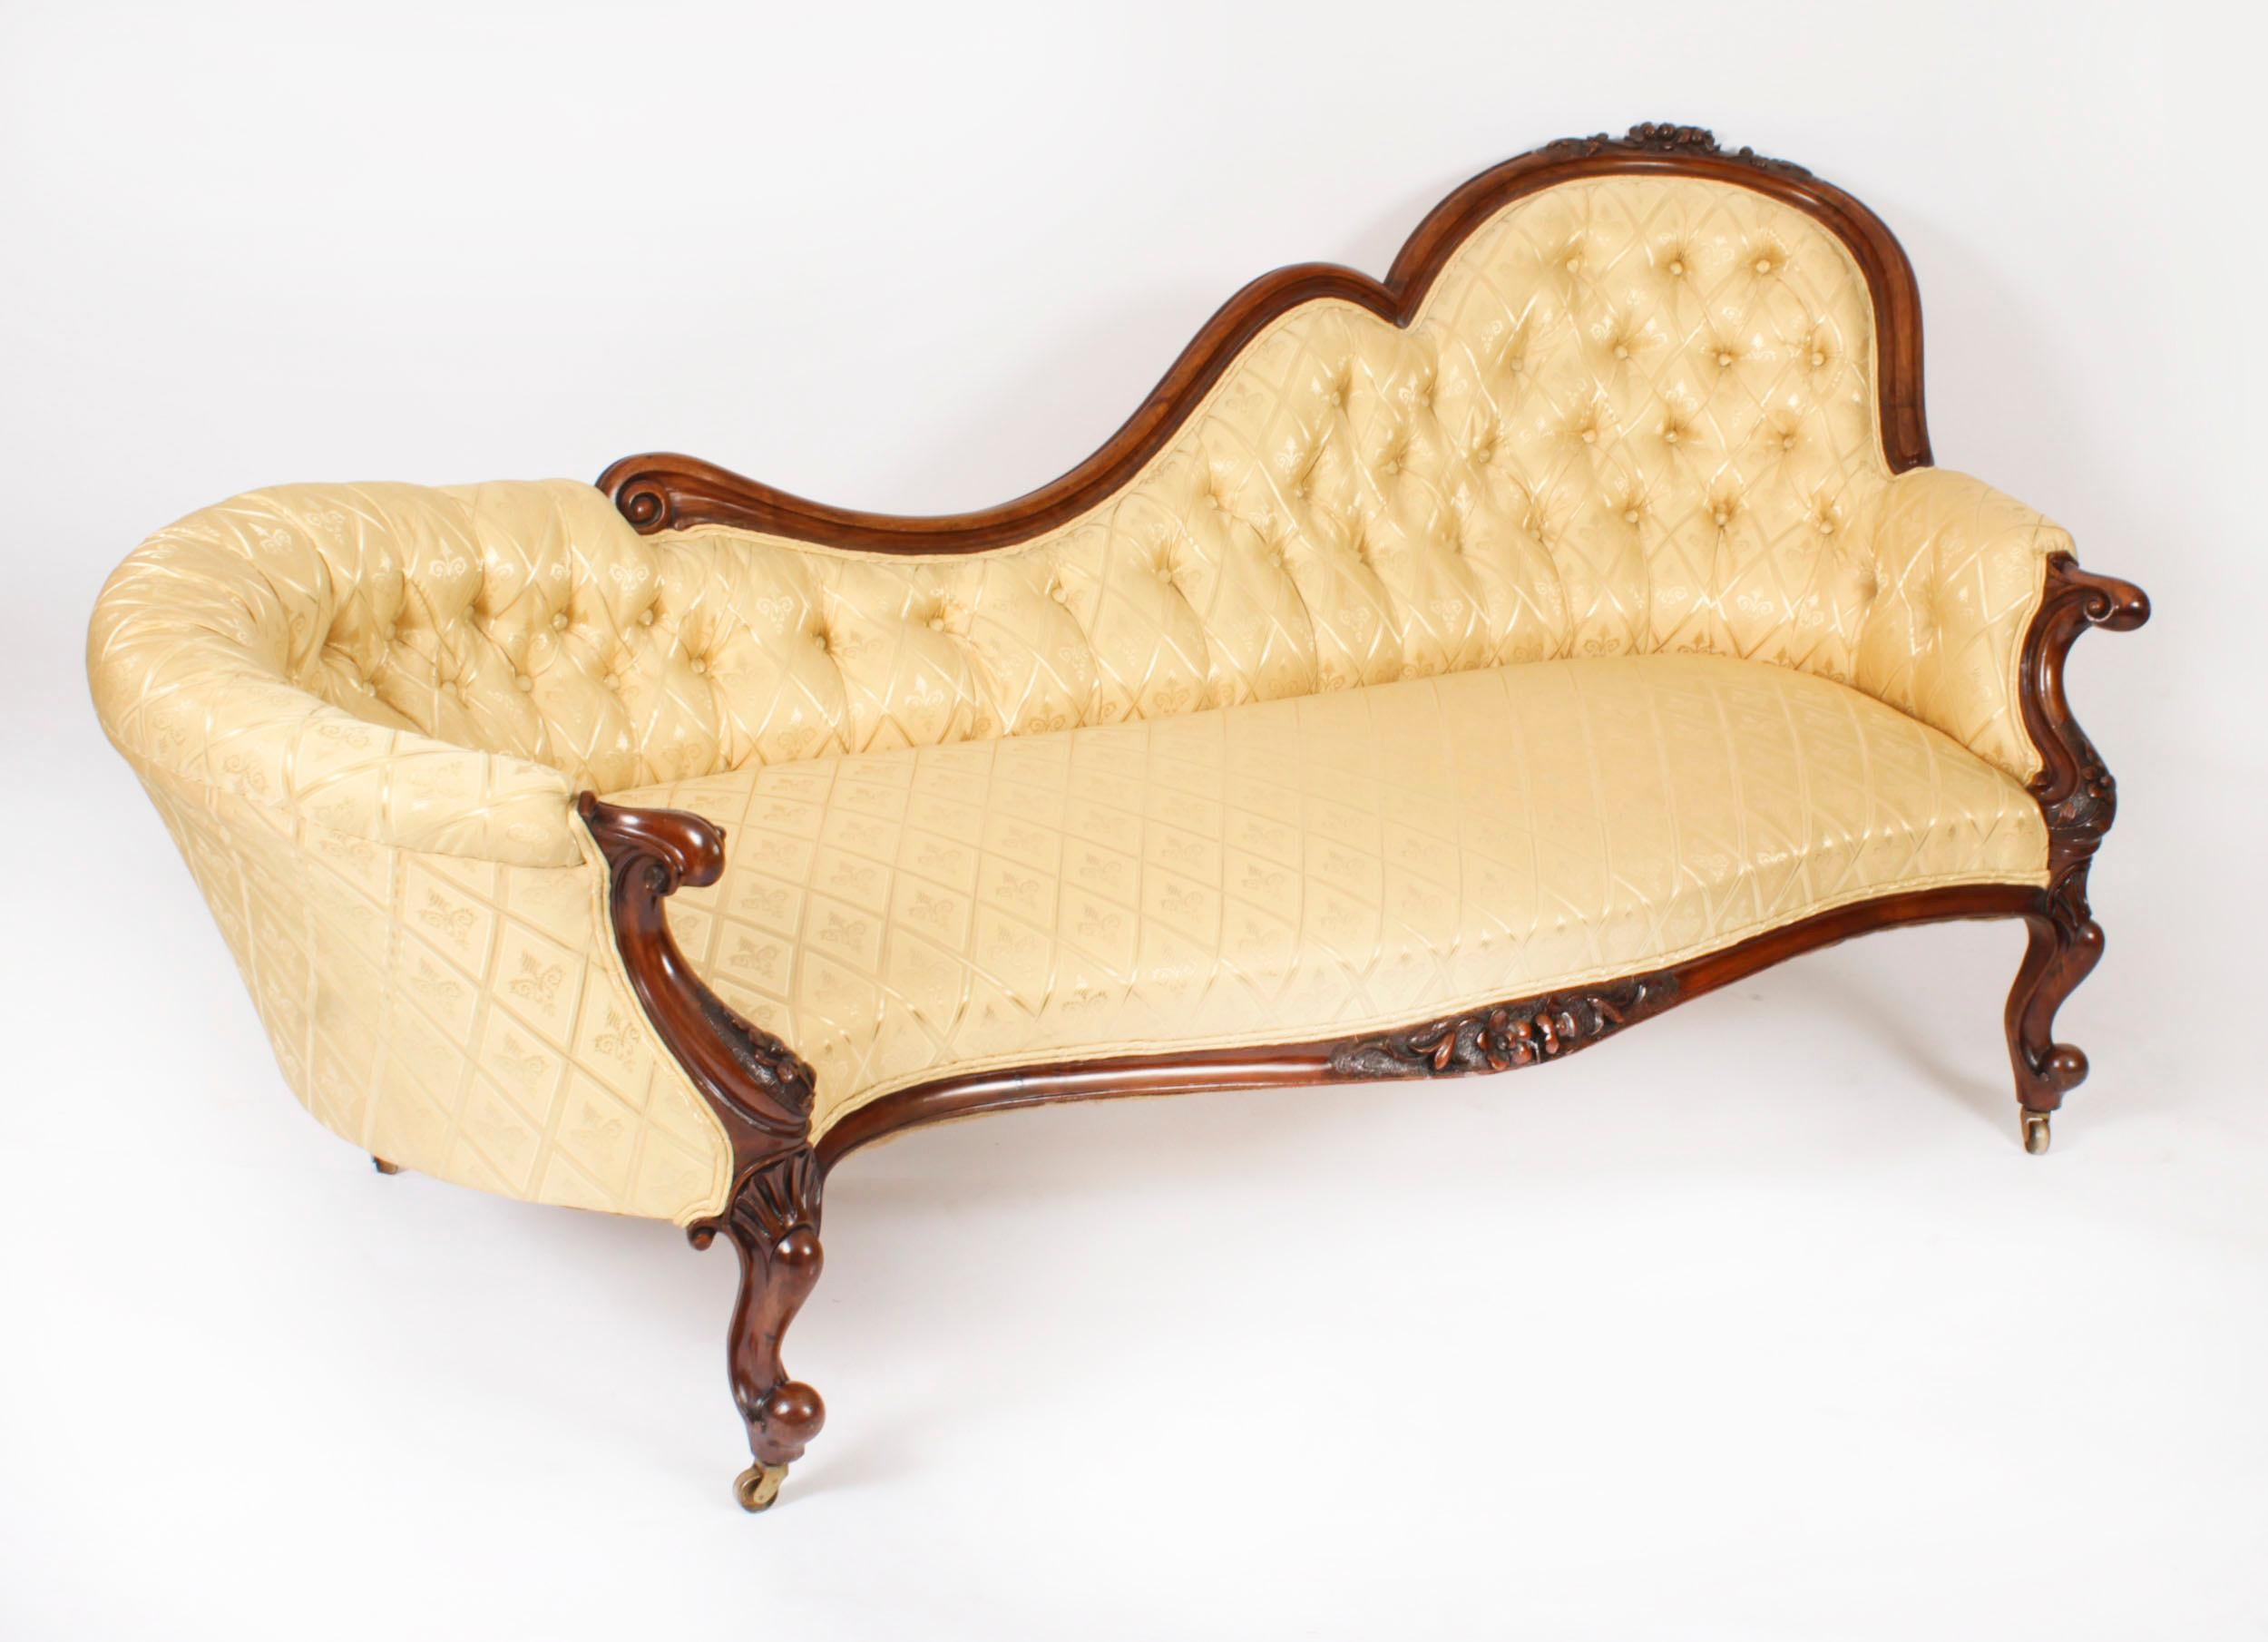 This is a fantastic antique Victorian chaise longue which dates from Circa 1860.

This sofa was made from hand carved solid walnut with carved floral decoration and stands on elegant carved cabriole legs which terminate in their original brass and